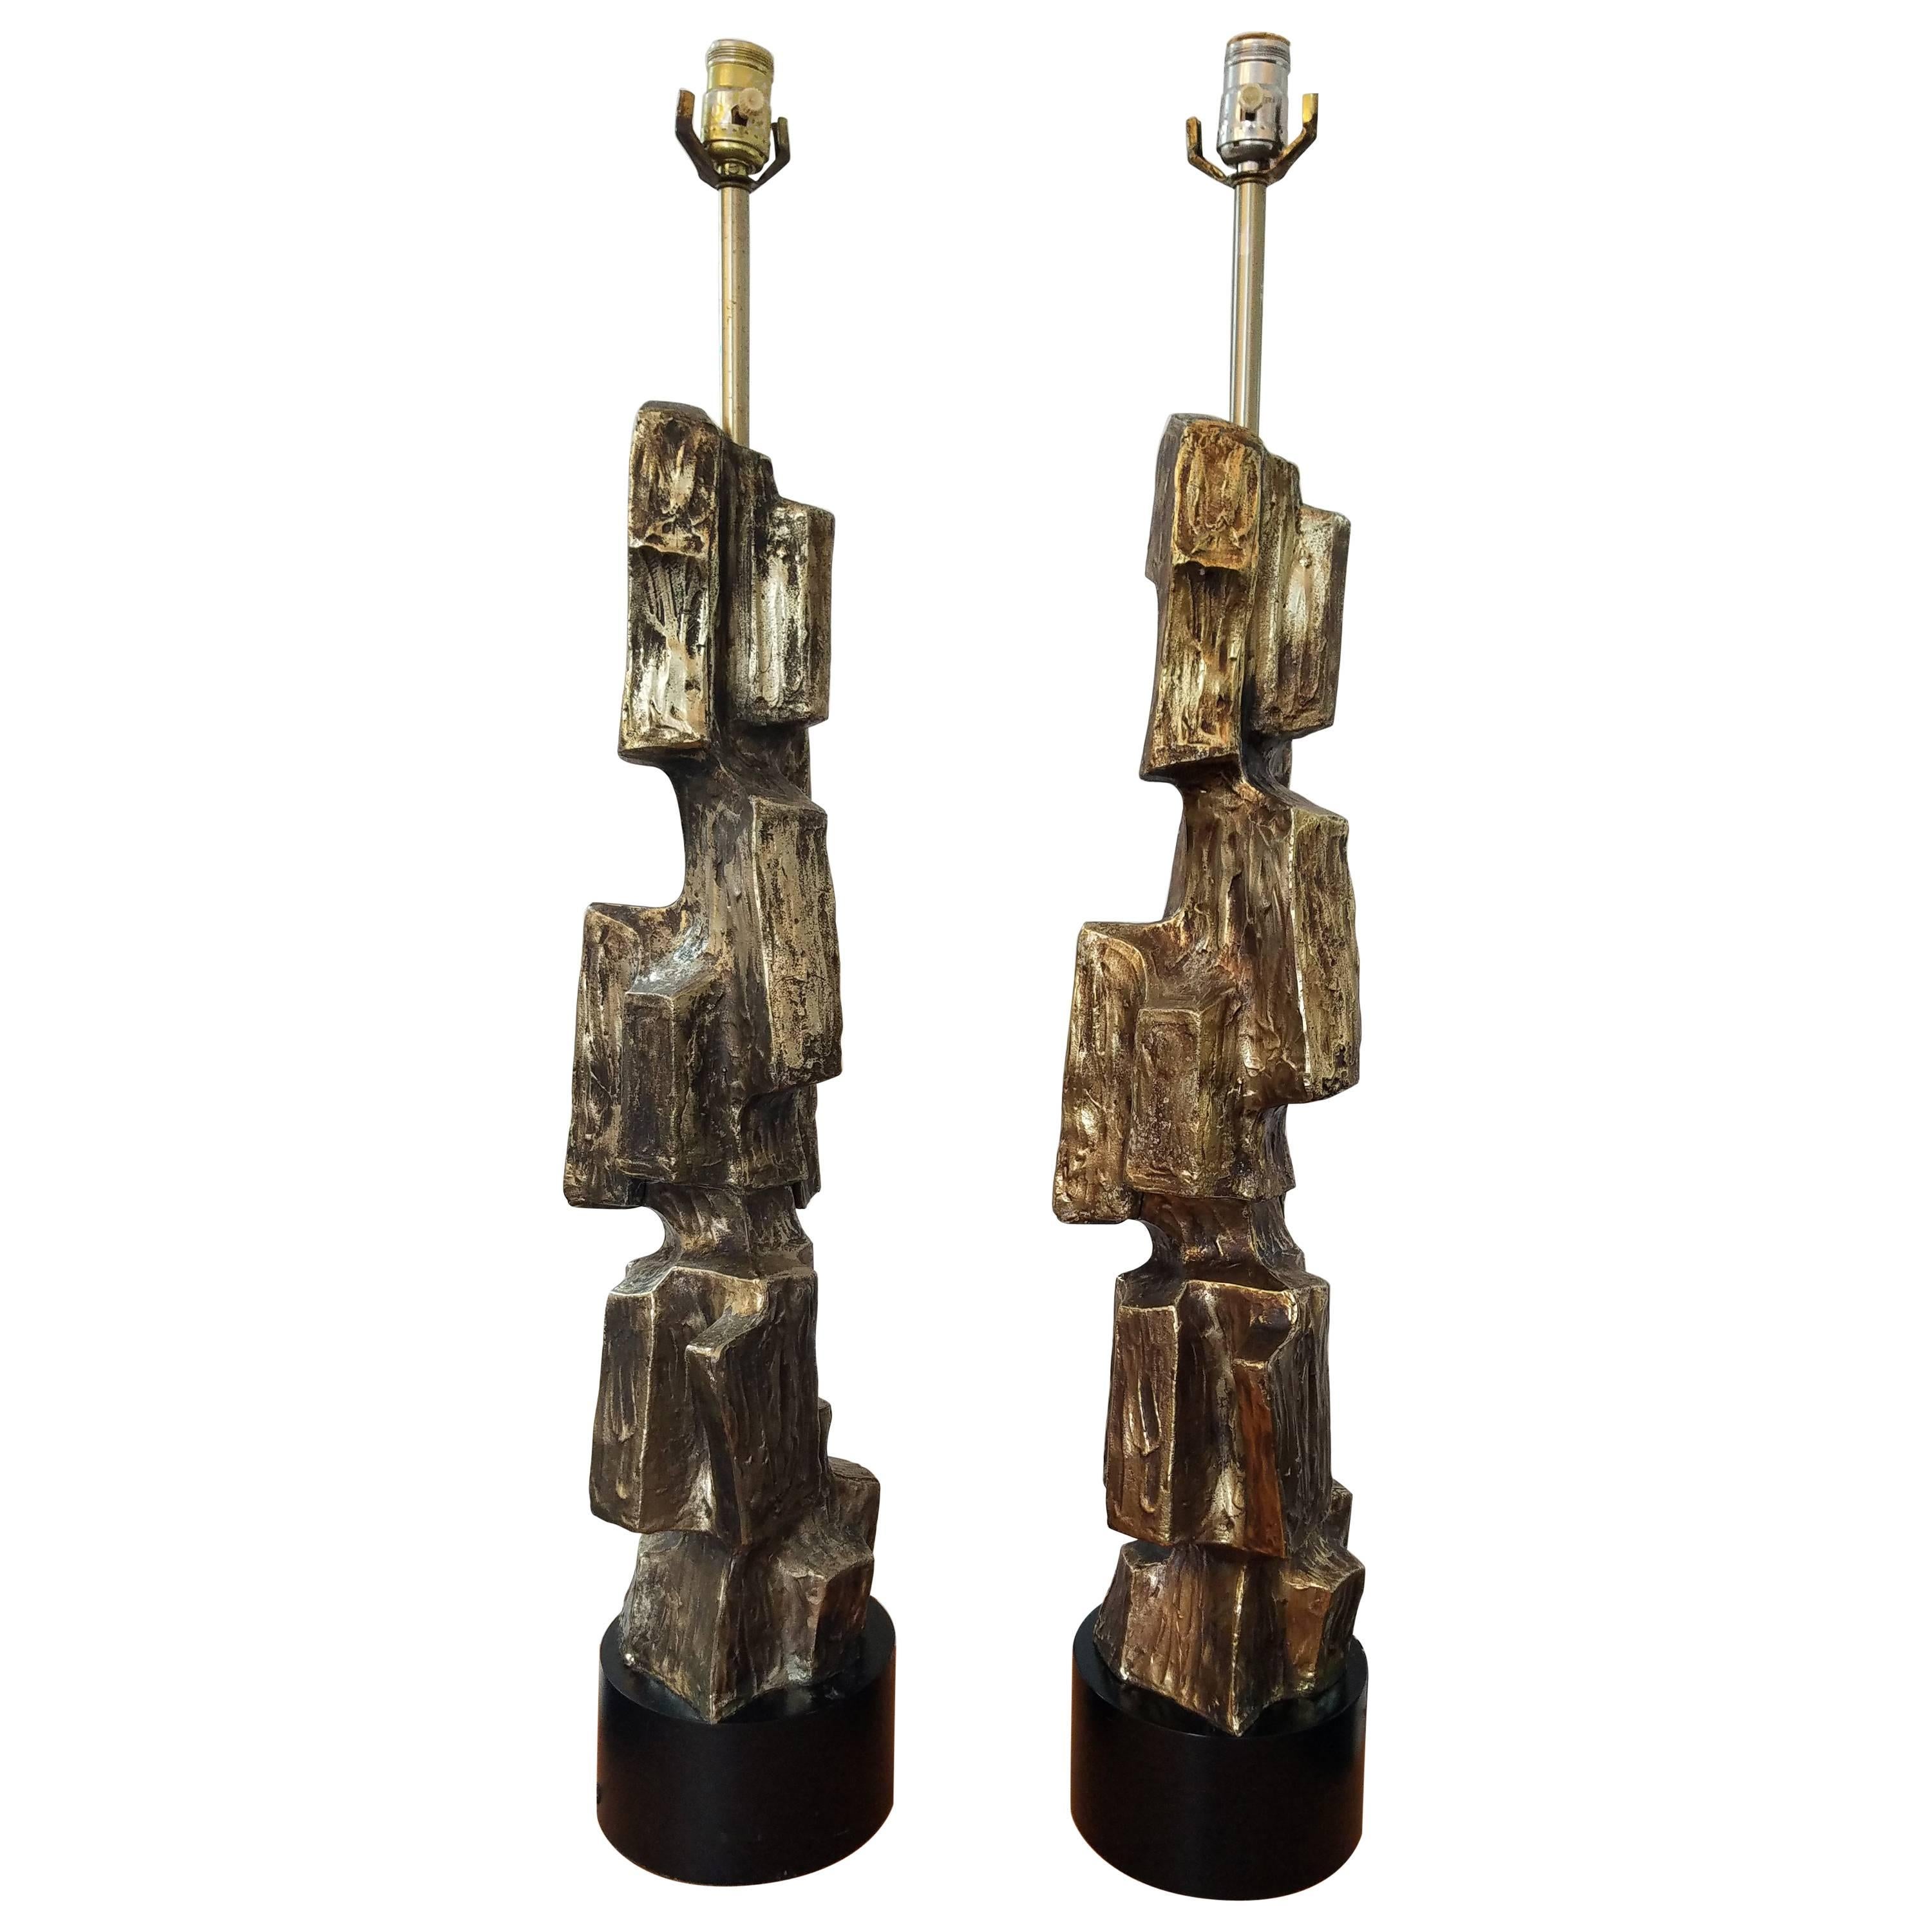 Pair of Large Brutalist Table Lamps by Maurizio Tempestini